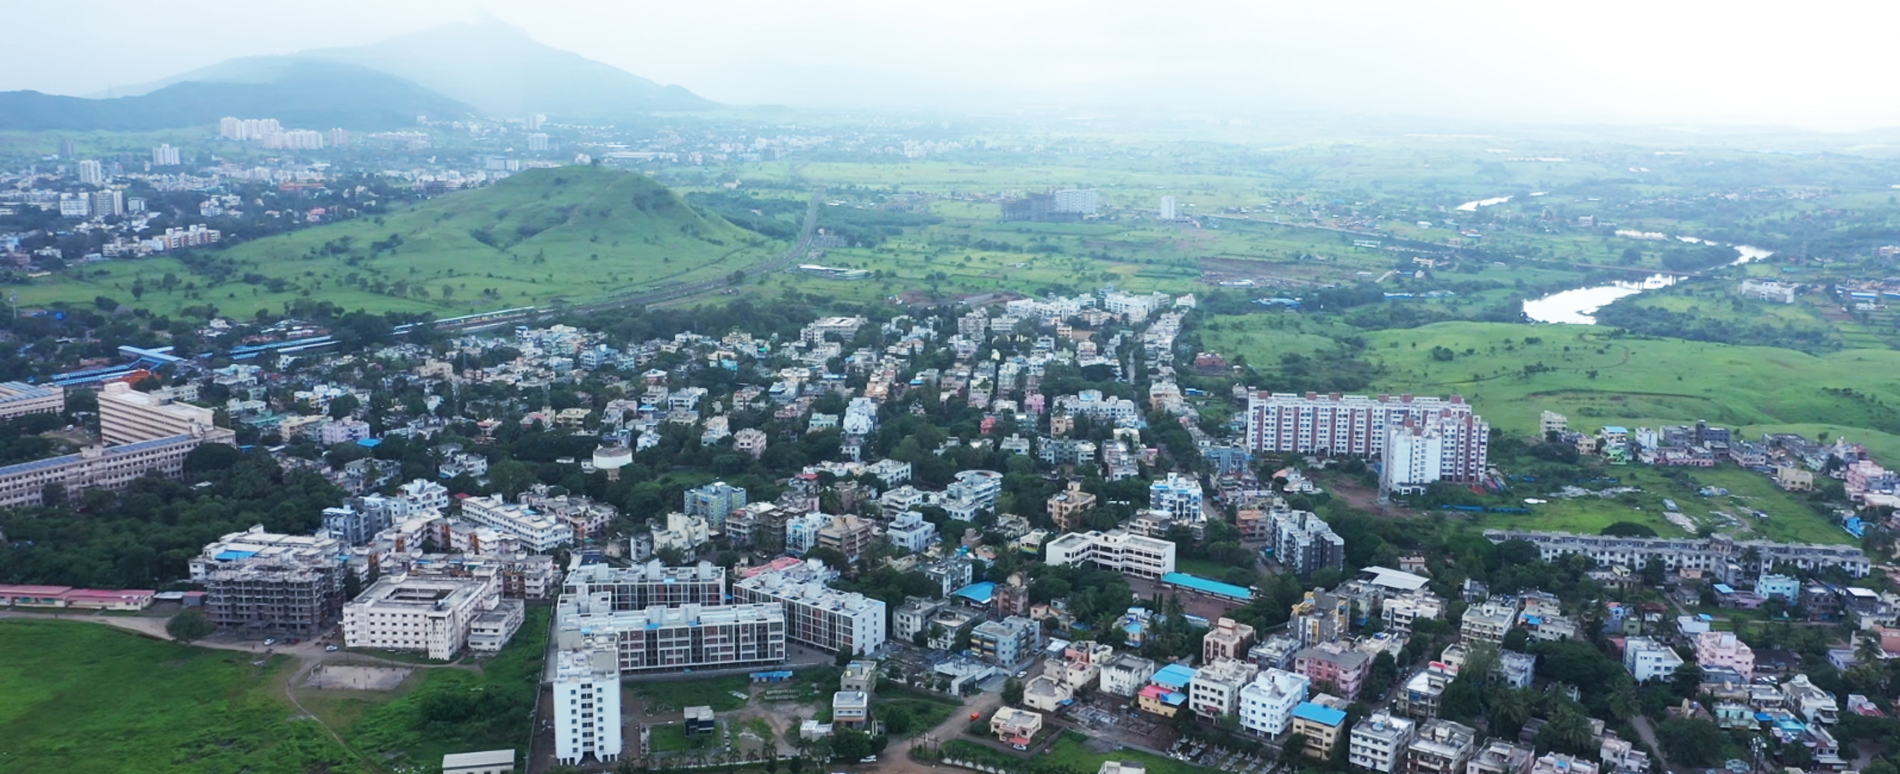 Aerial view of Talegaon